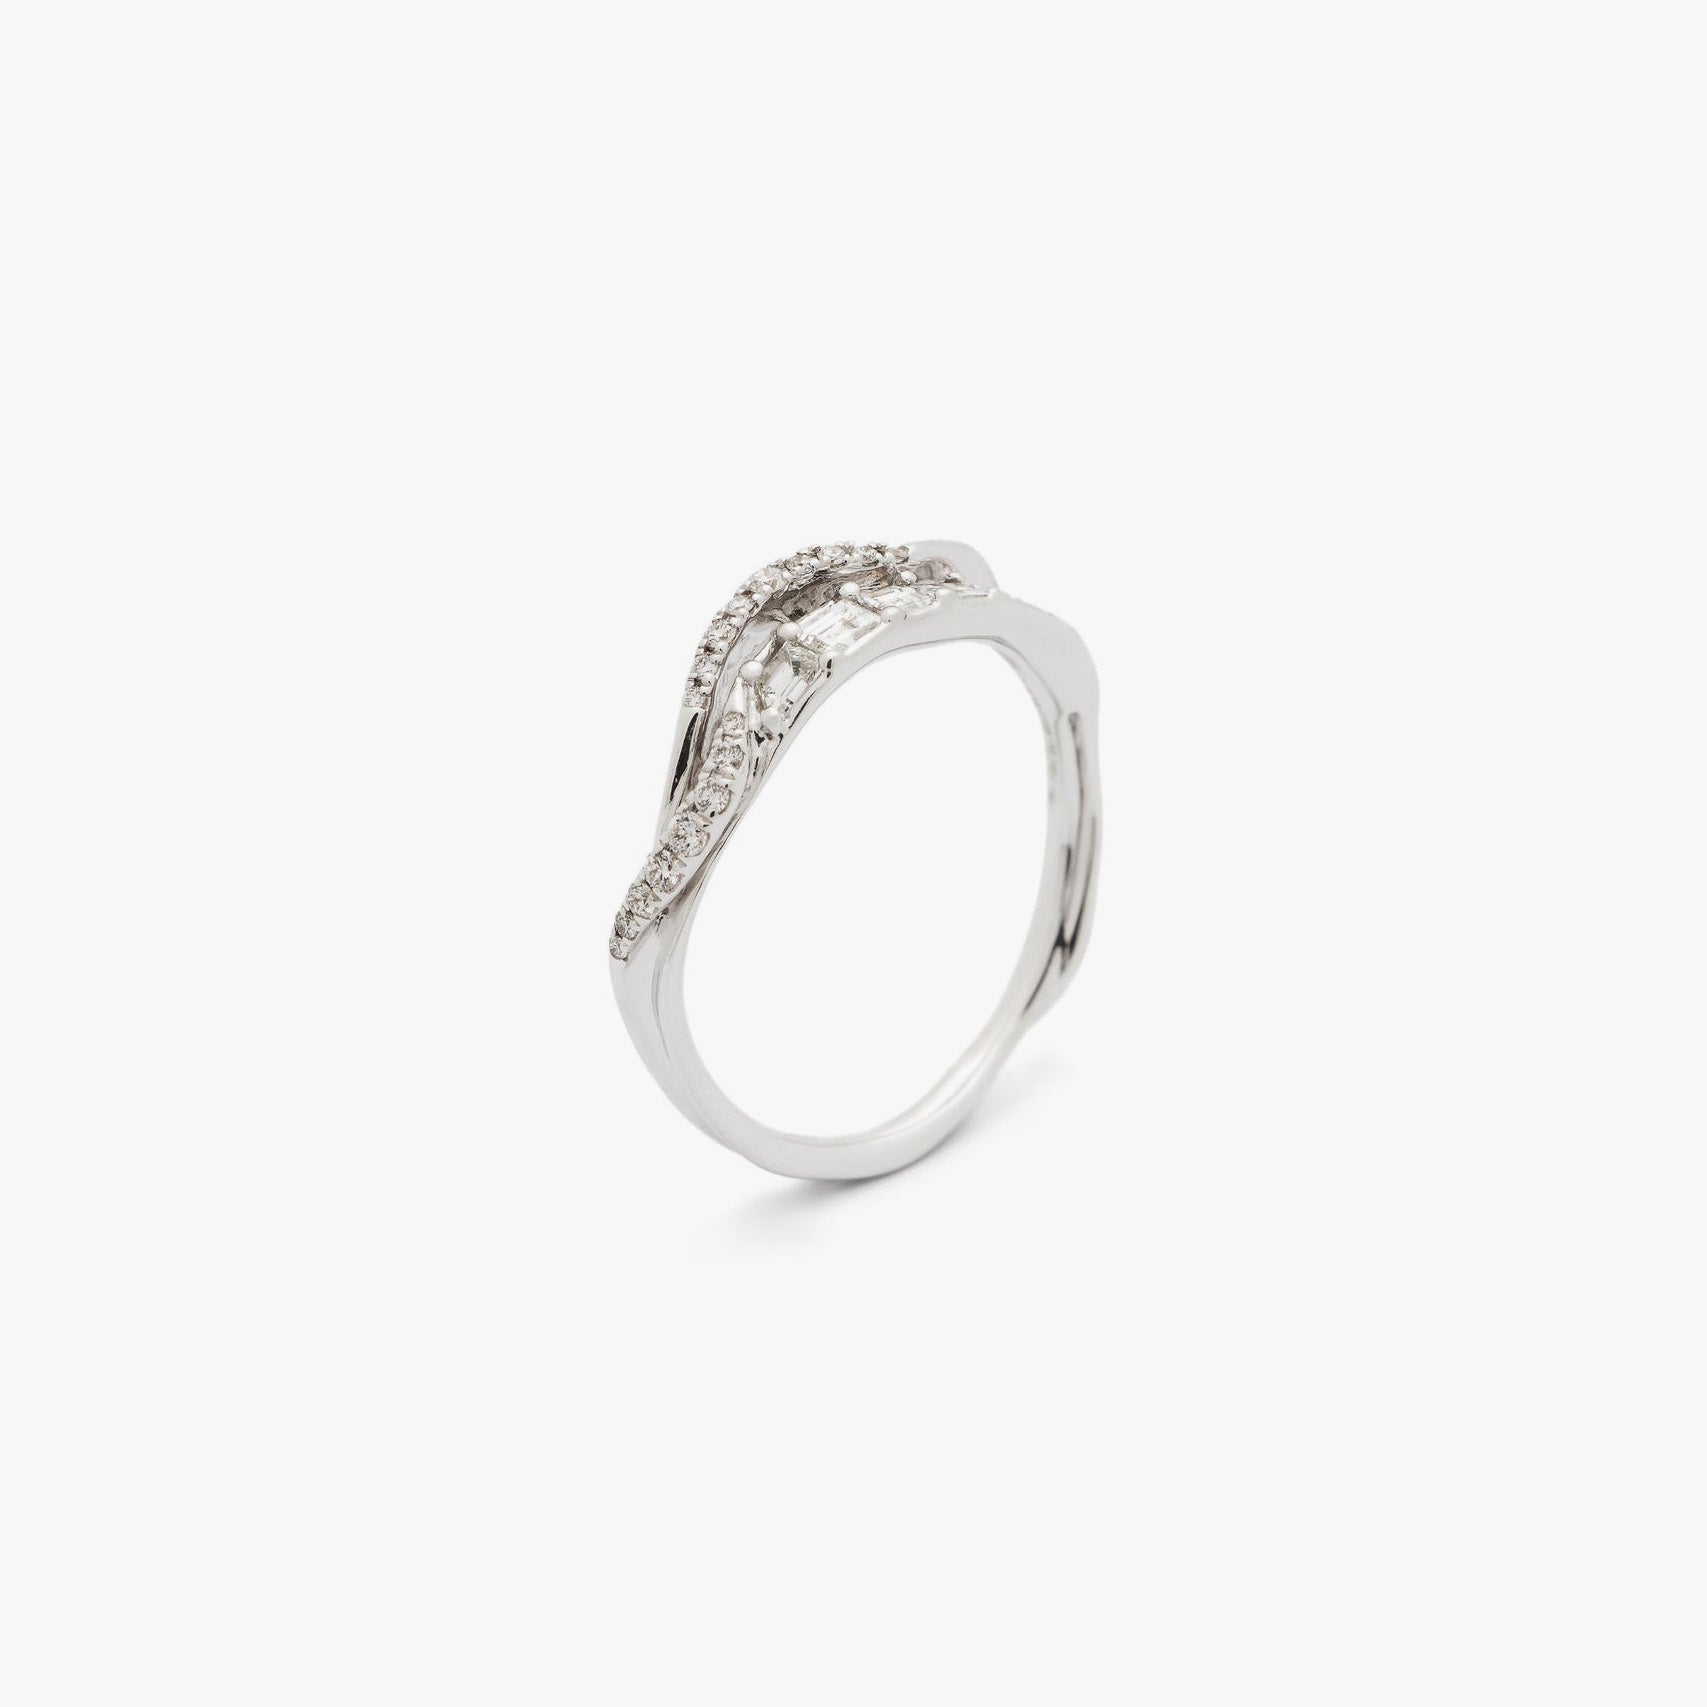 Diamond Inhale Stackable Ring